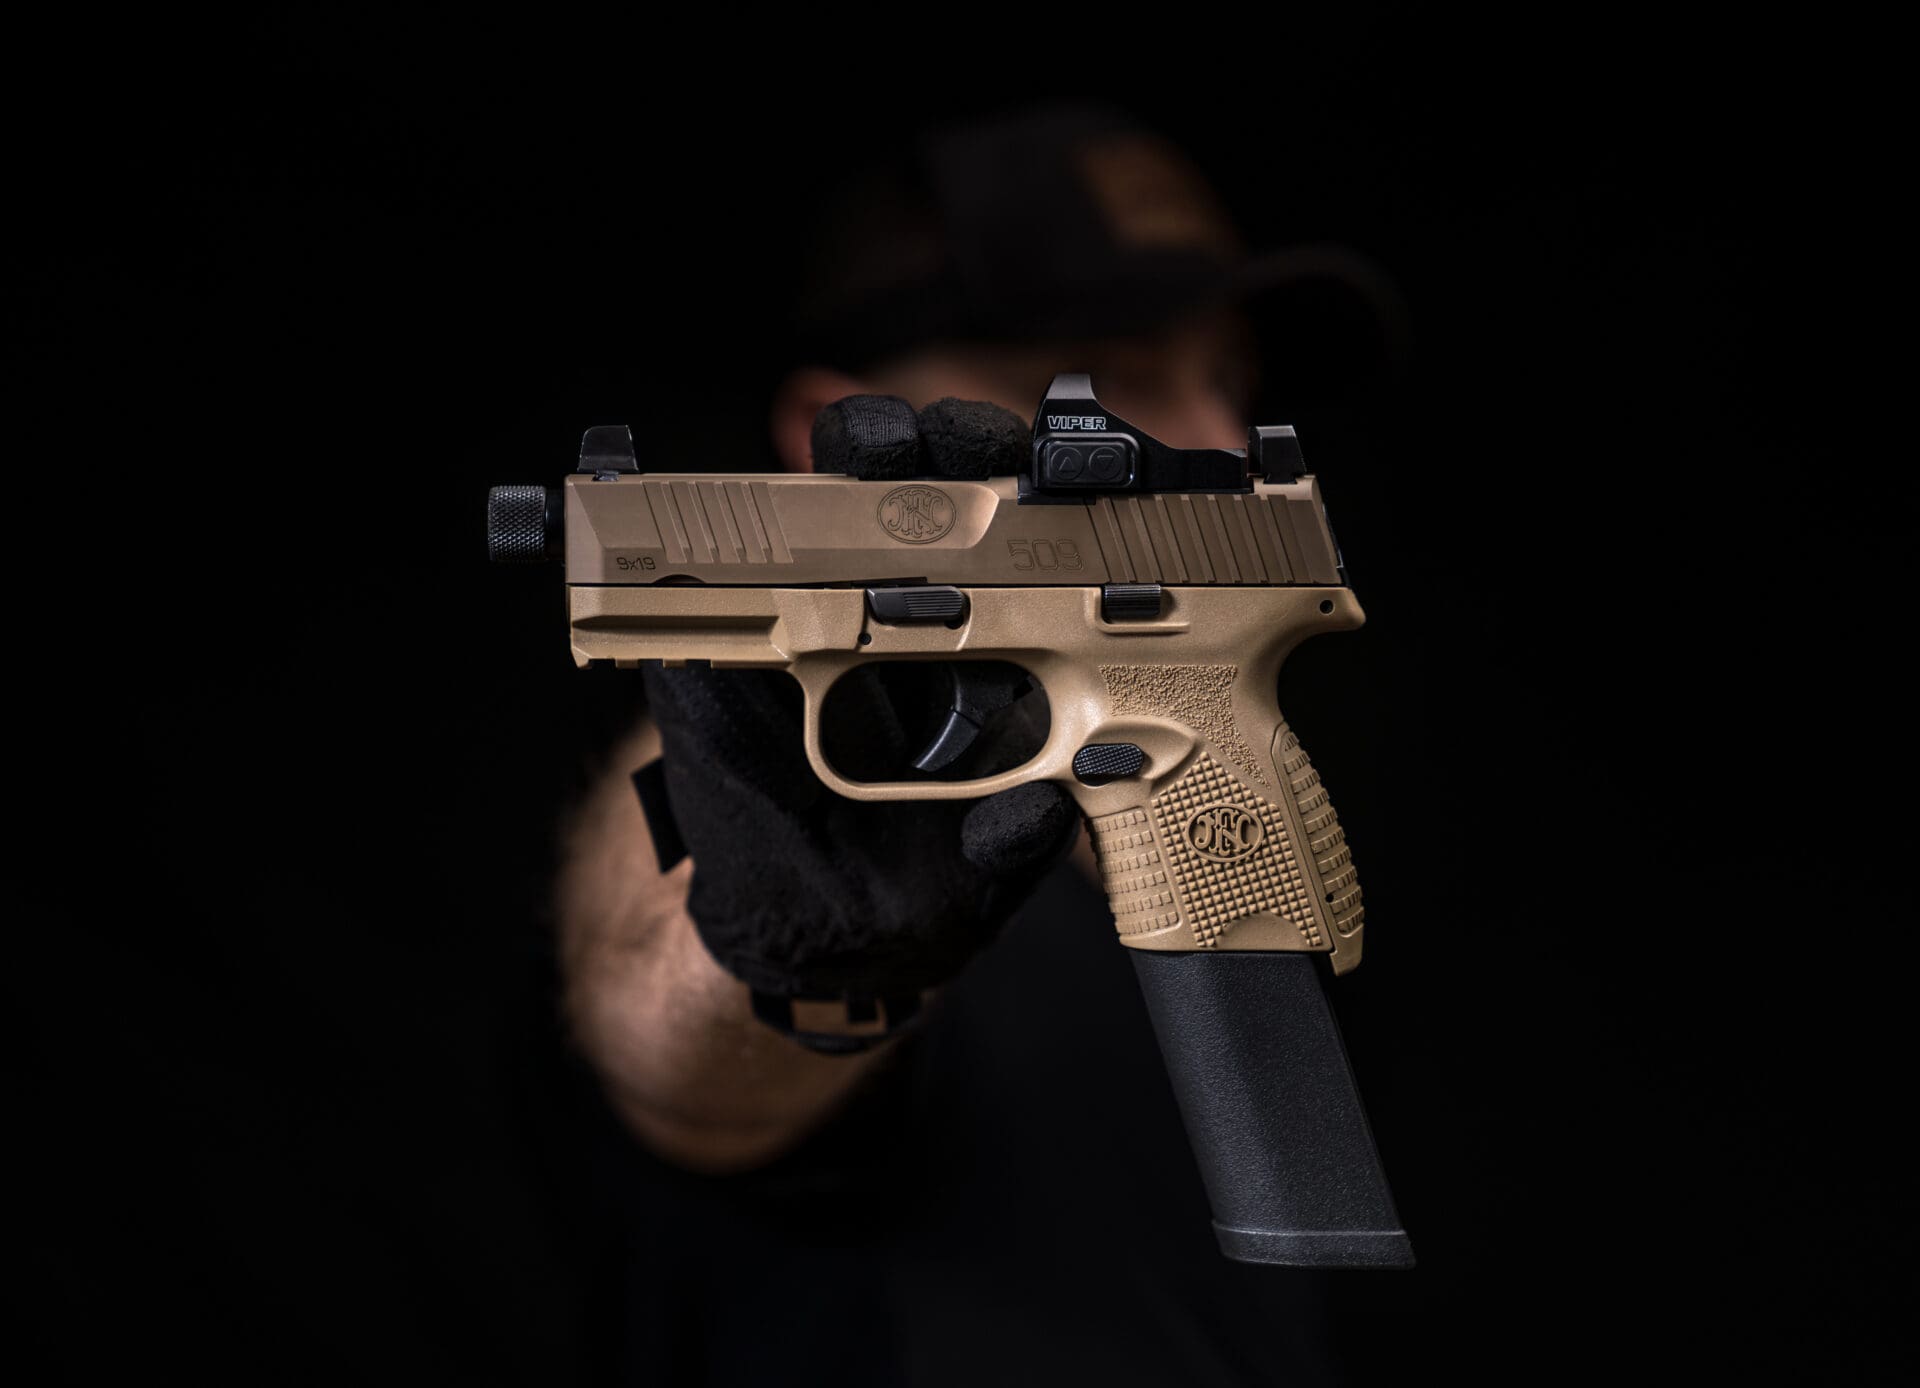 FN 509 Compact Tactical